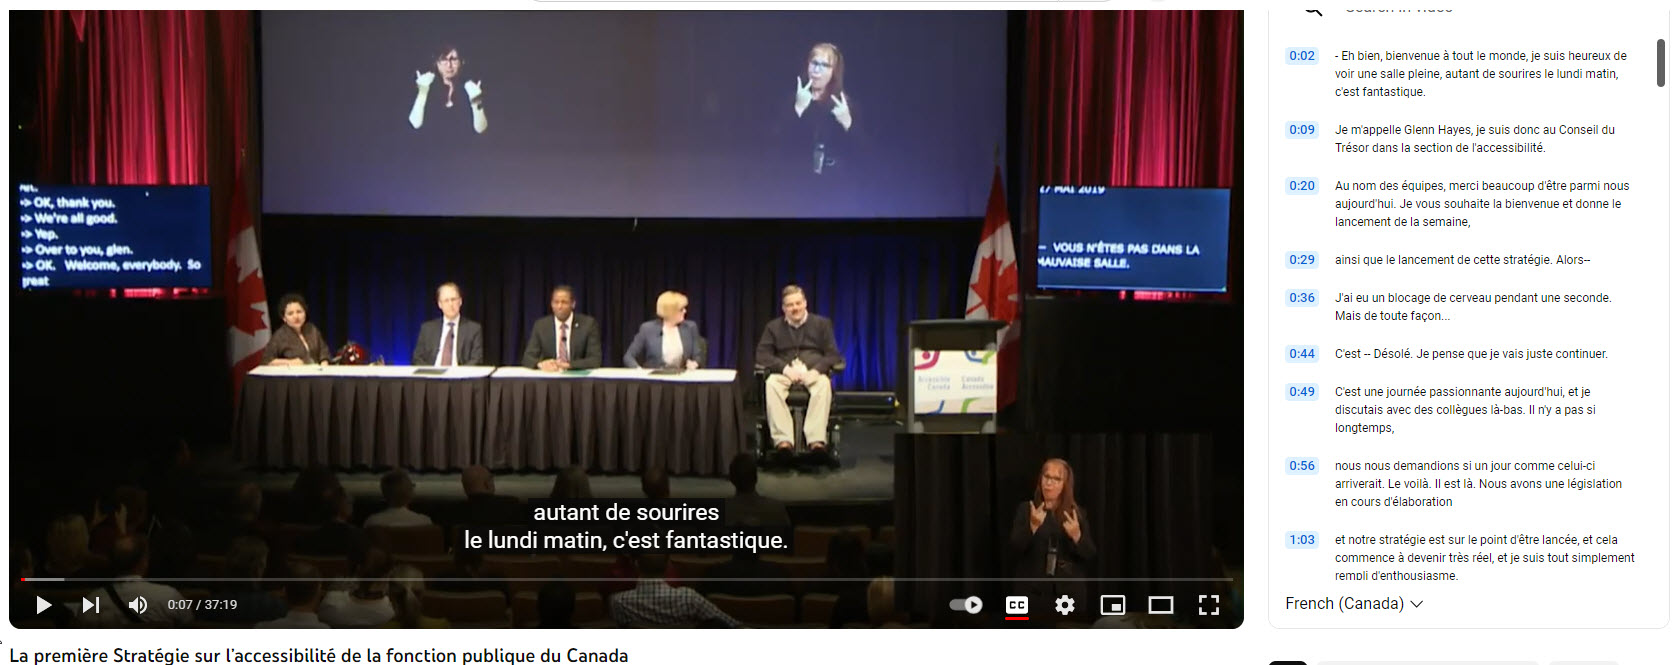 Screenshot of video including transcript, captions and translated content.